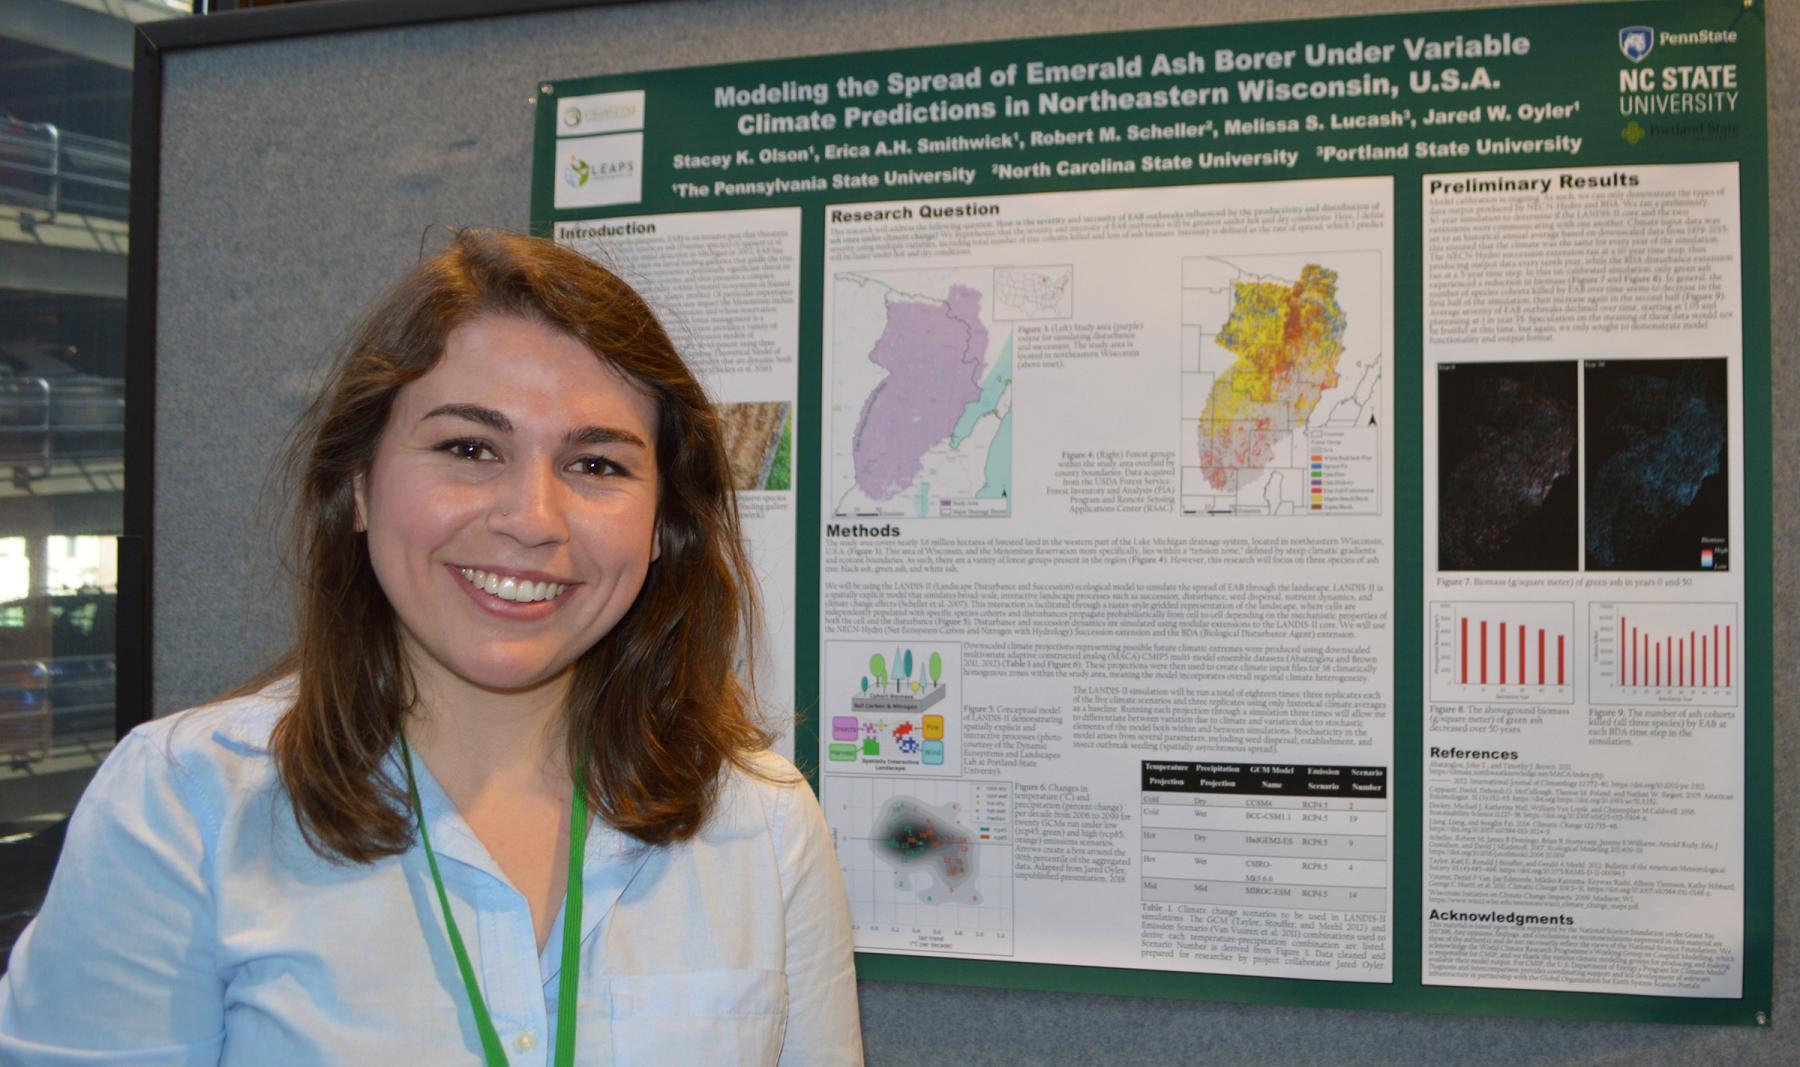 Stacey Olsen presents her research poster at AAG 2018